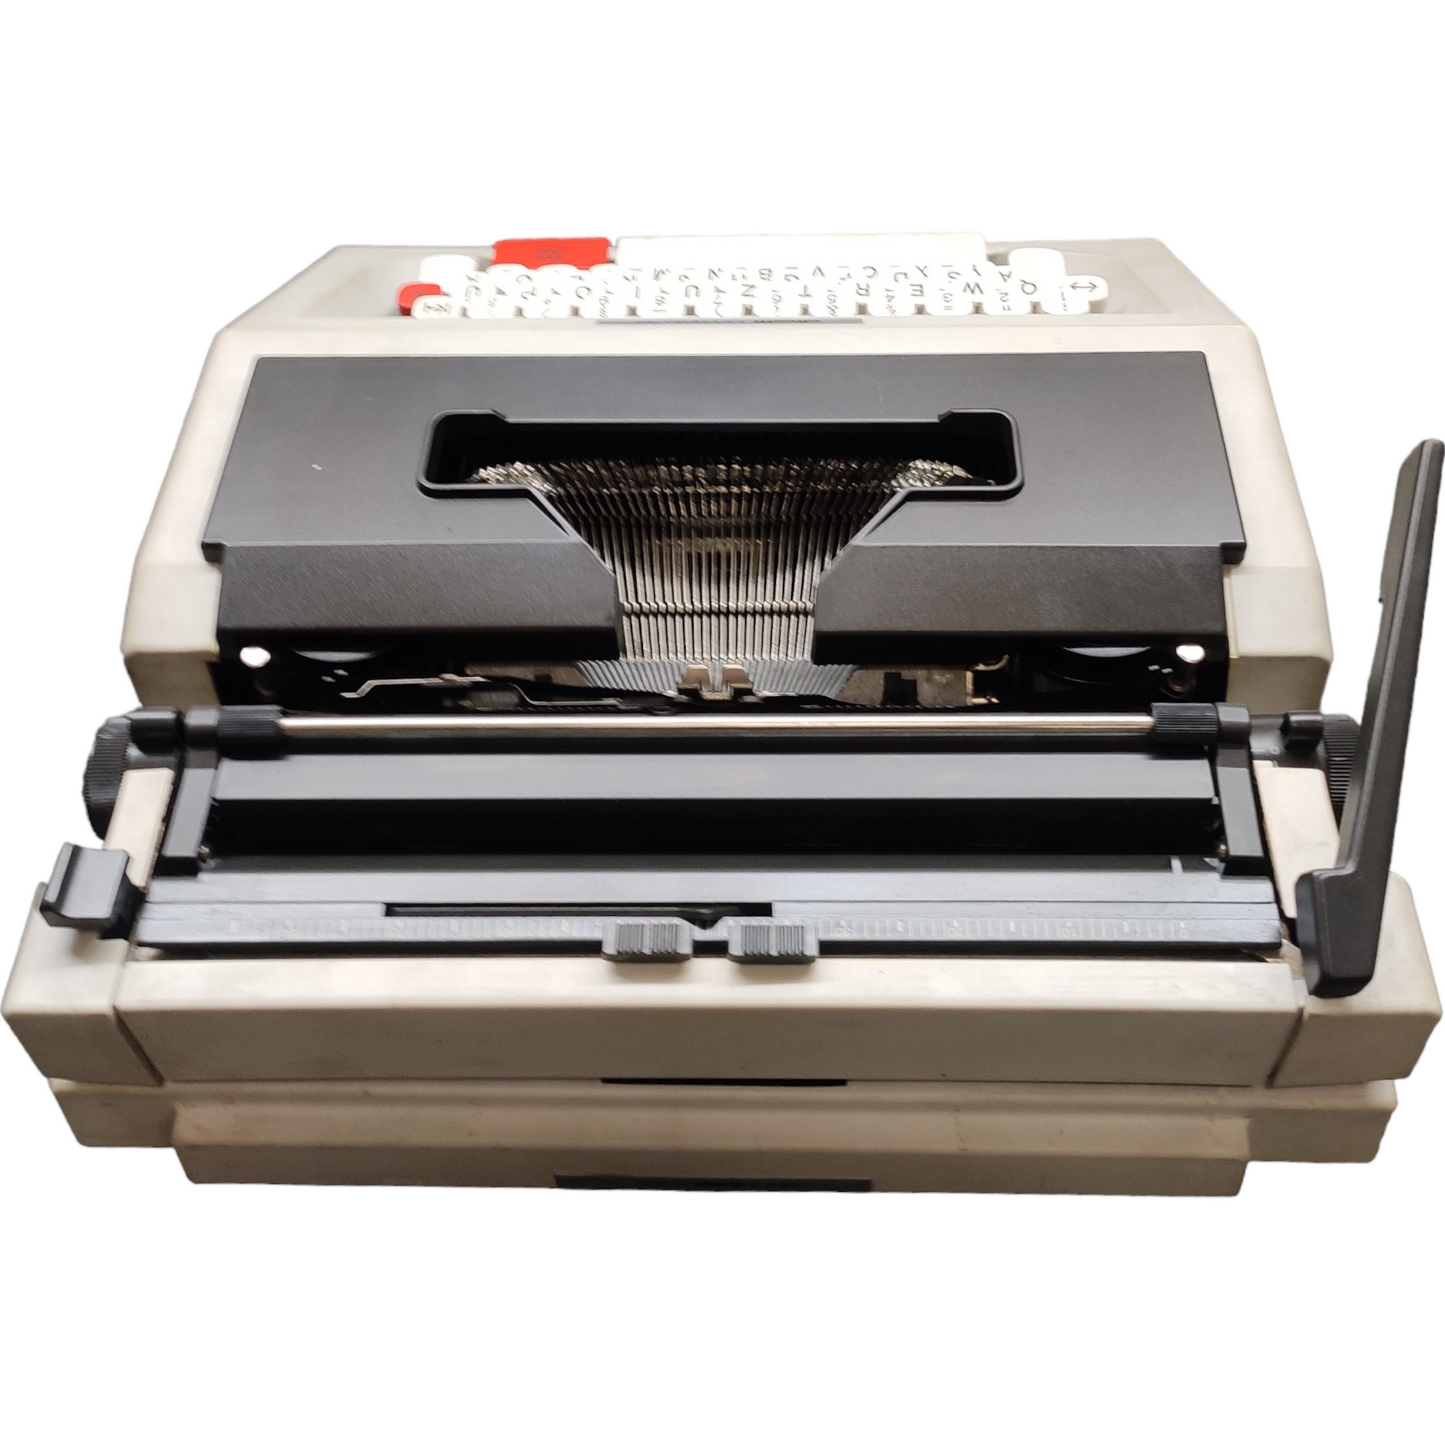 Image of Olivetti Lettera 42 Typewriter with original fibre cover. Available from universaltypewritercompany.in